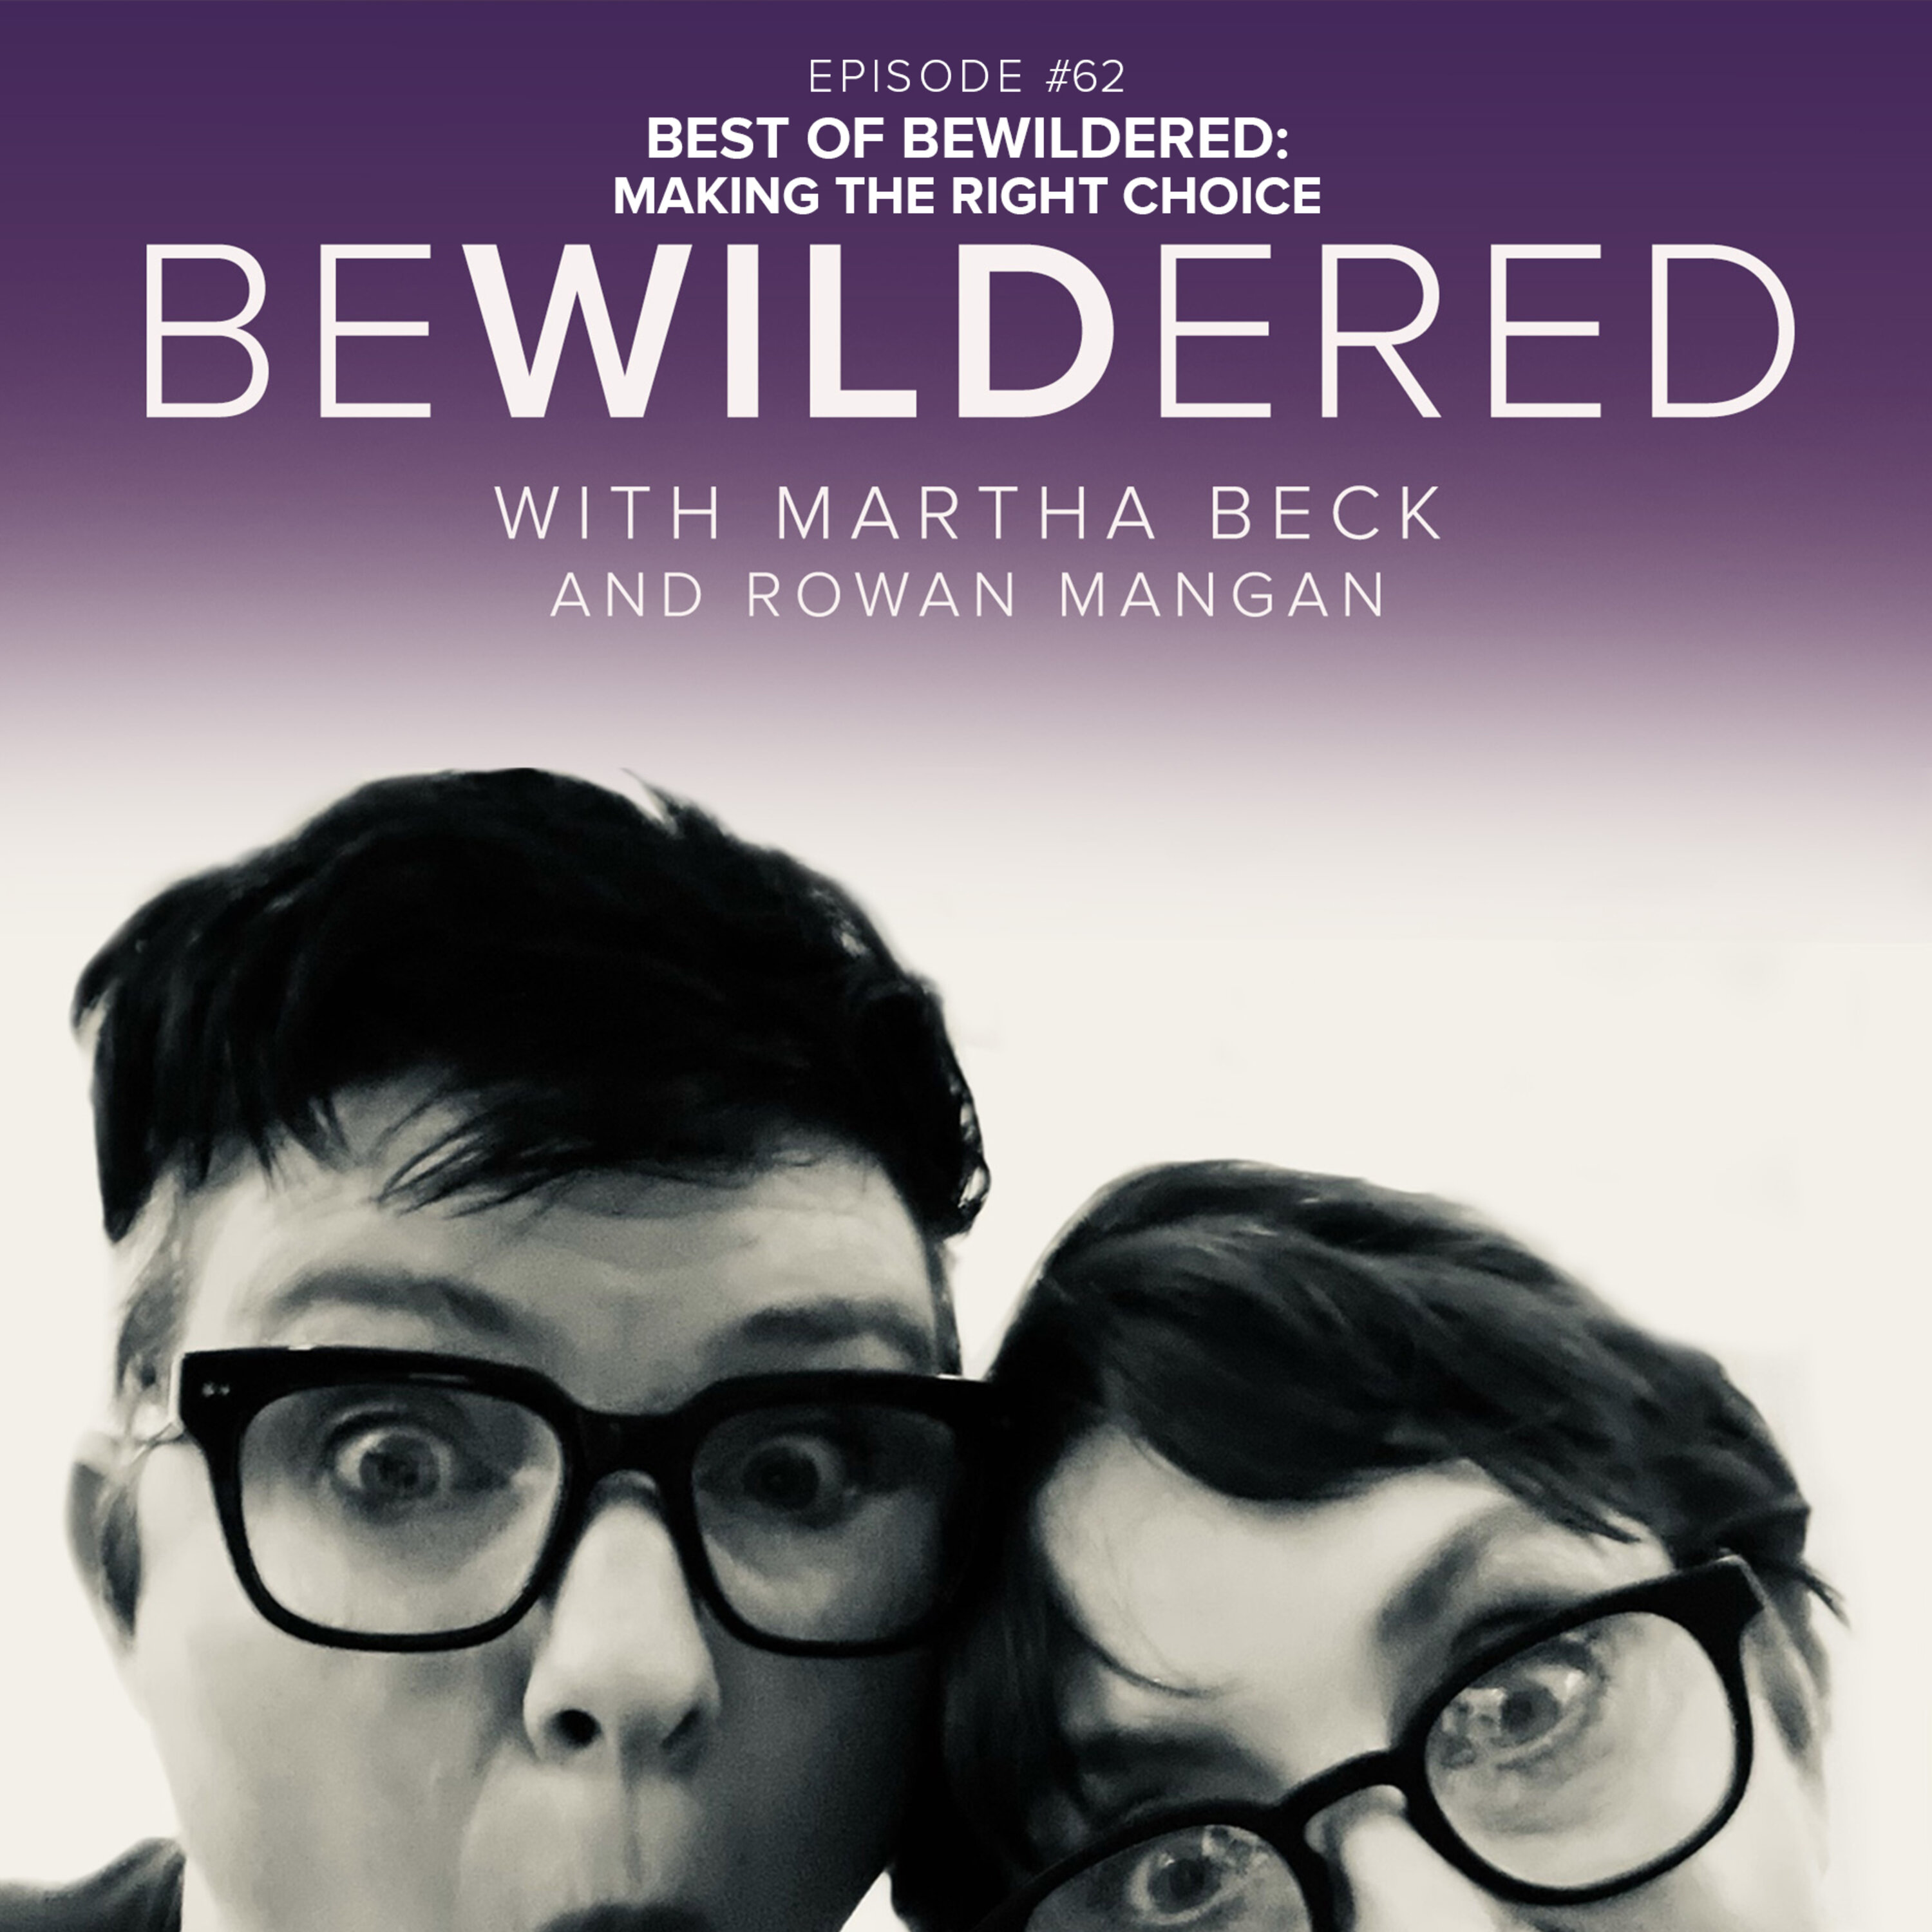 Best of Bewildered: Making the Right Choice